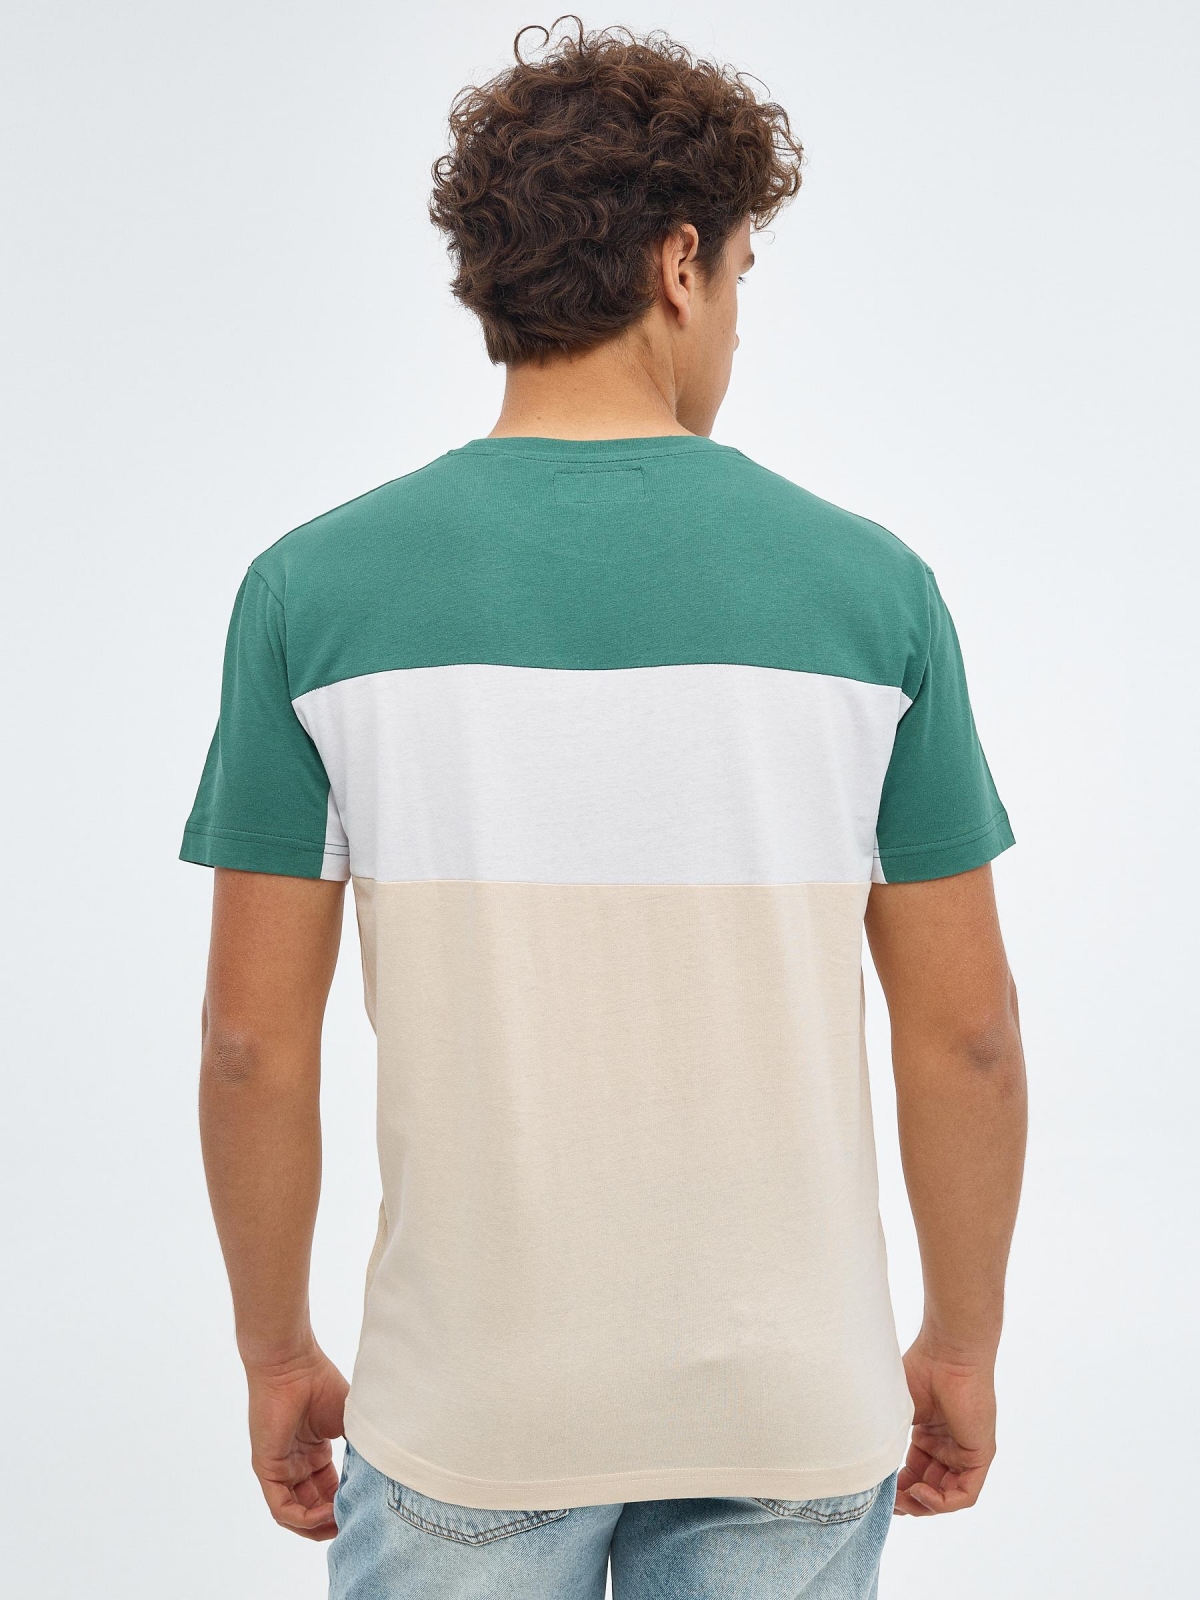 Green Mountains T-shirt sand middle back view